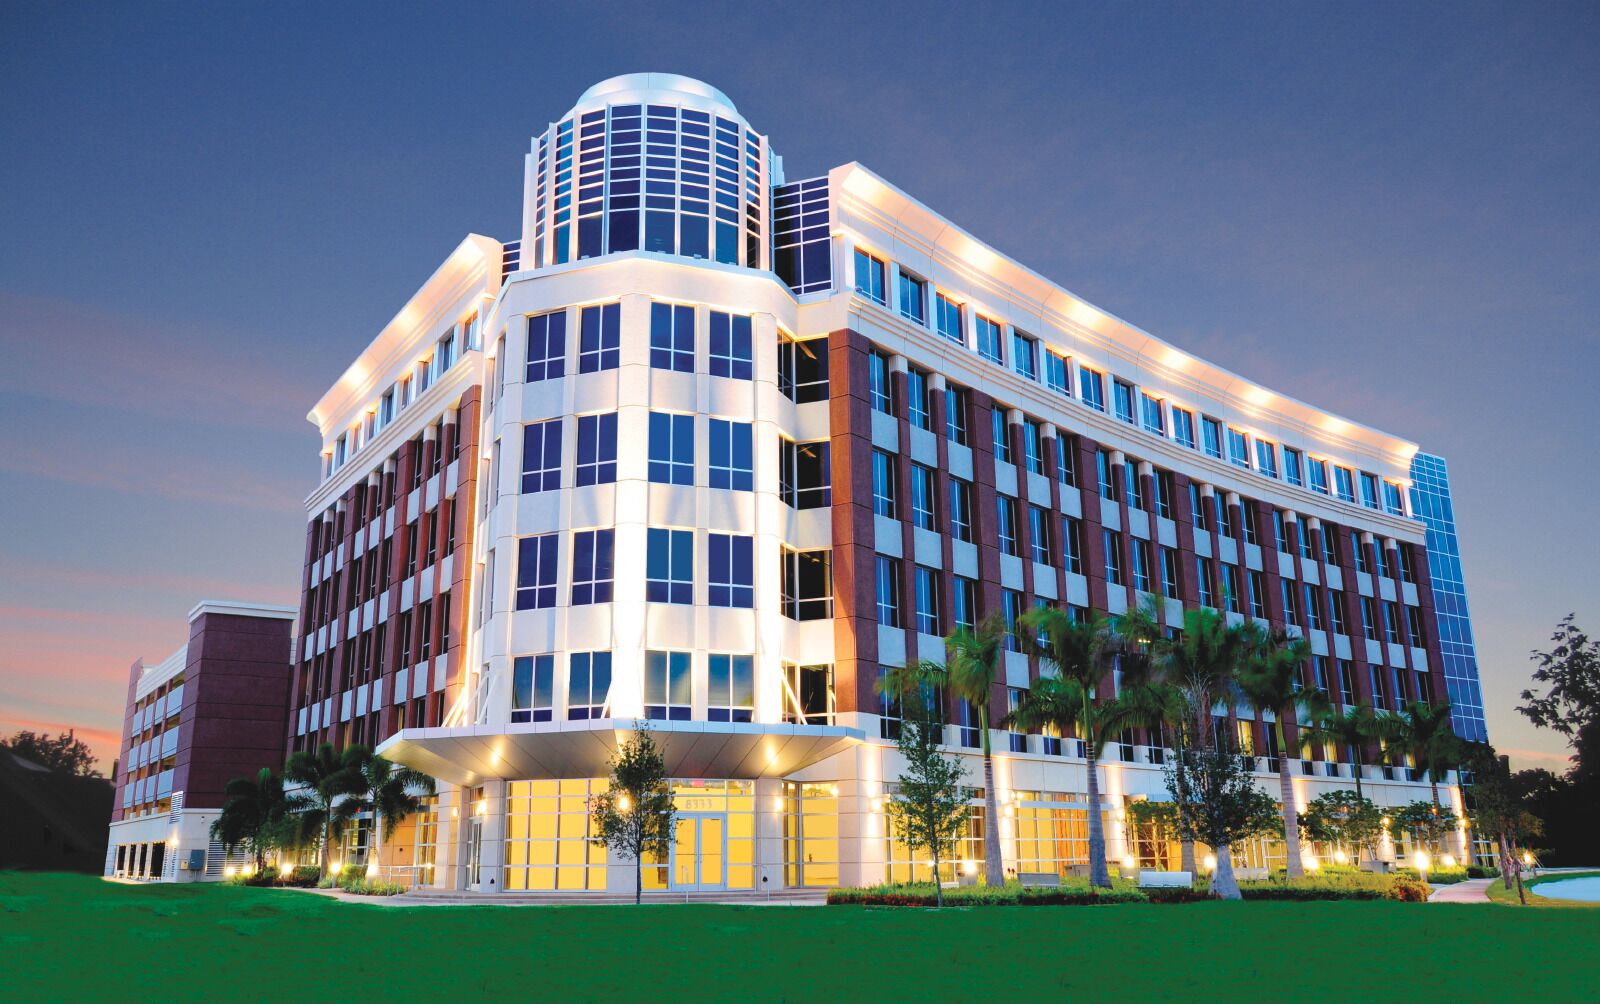 Downtown Doral’s 8333 Building achieves LEED Gold Certification